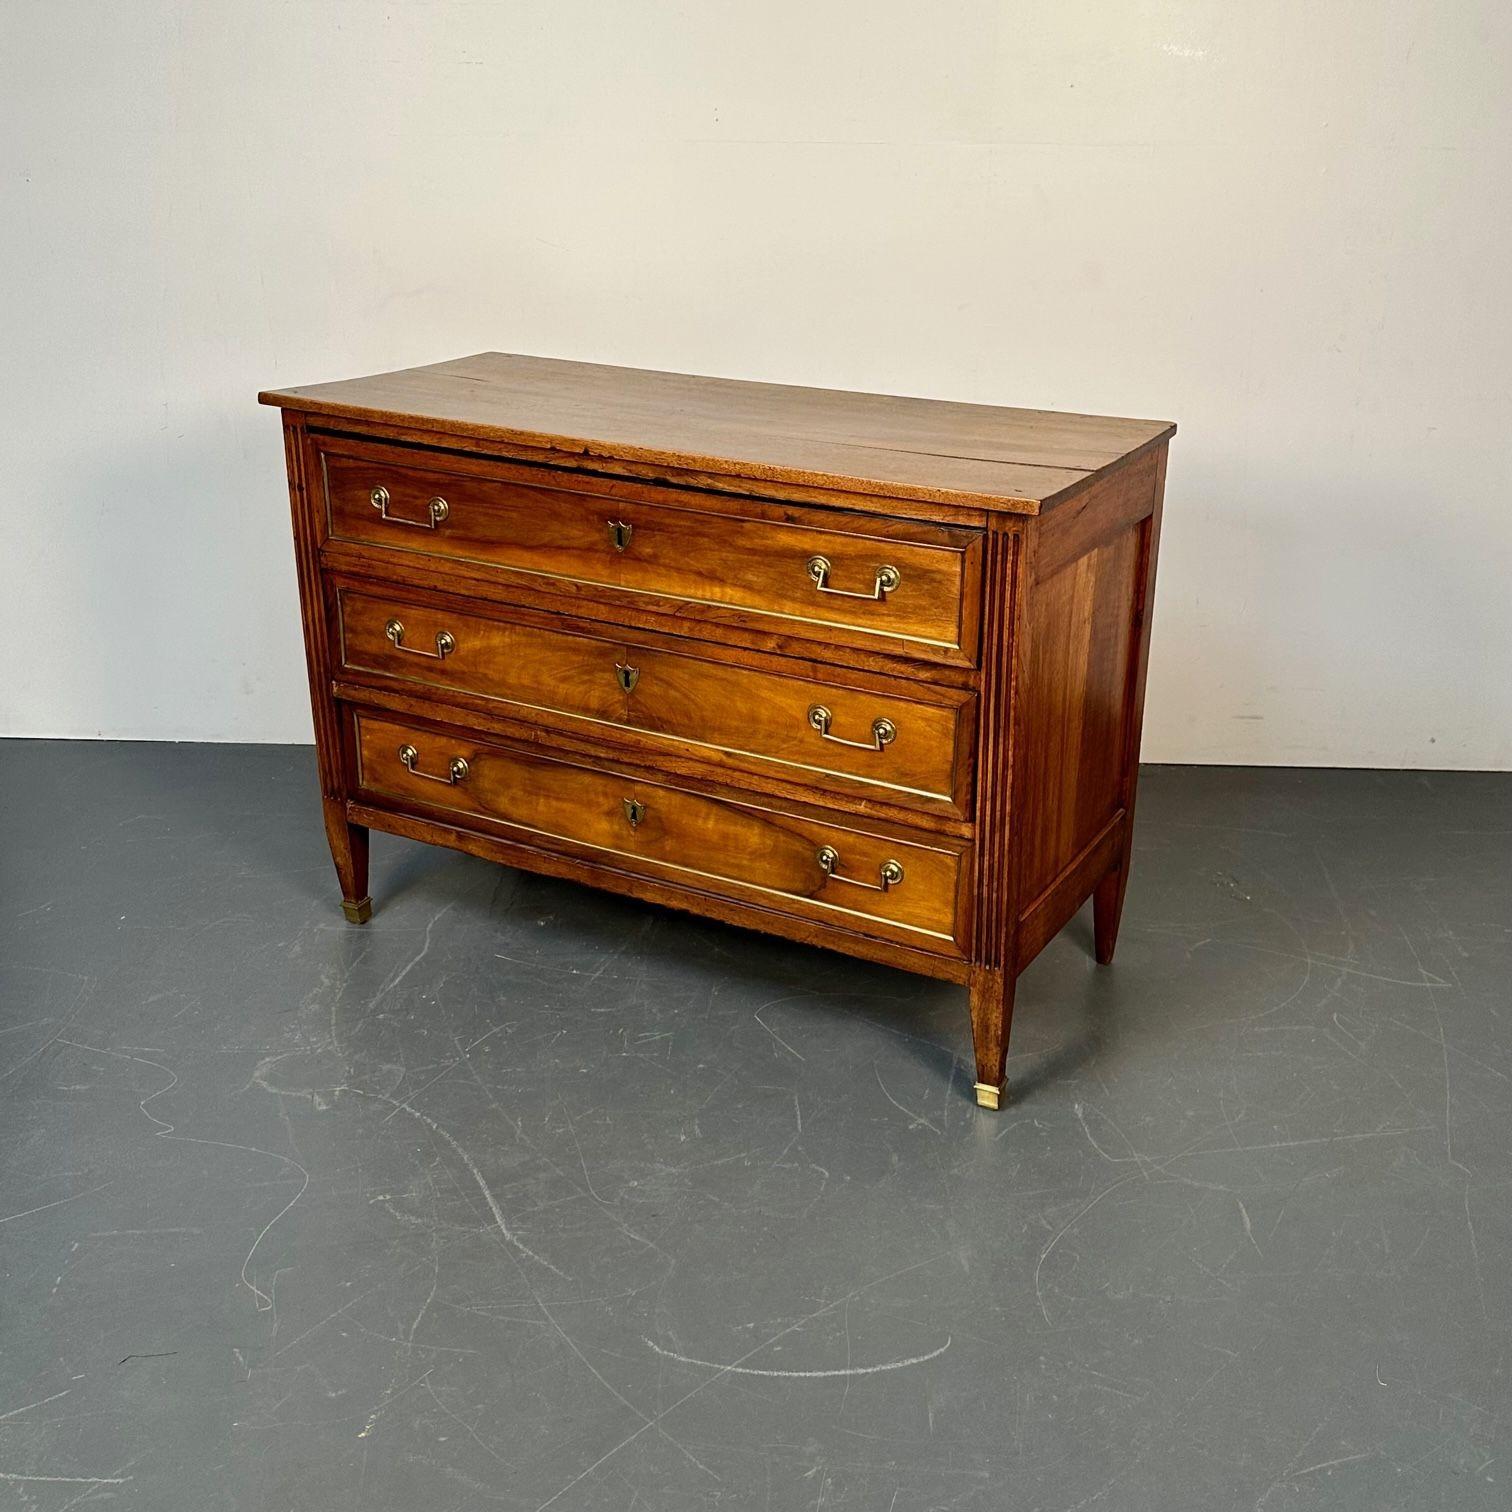 Period 18th Century French Louis XVI Mahogany Commode / Chest, Bronze Accent In Good Condition For Sale In Stamford, CT